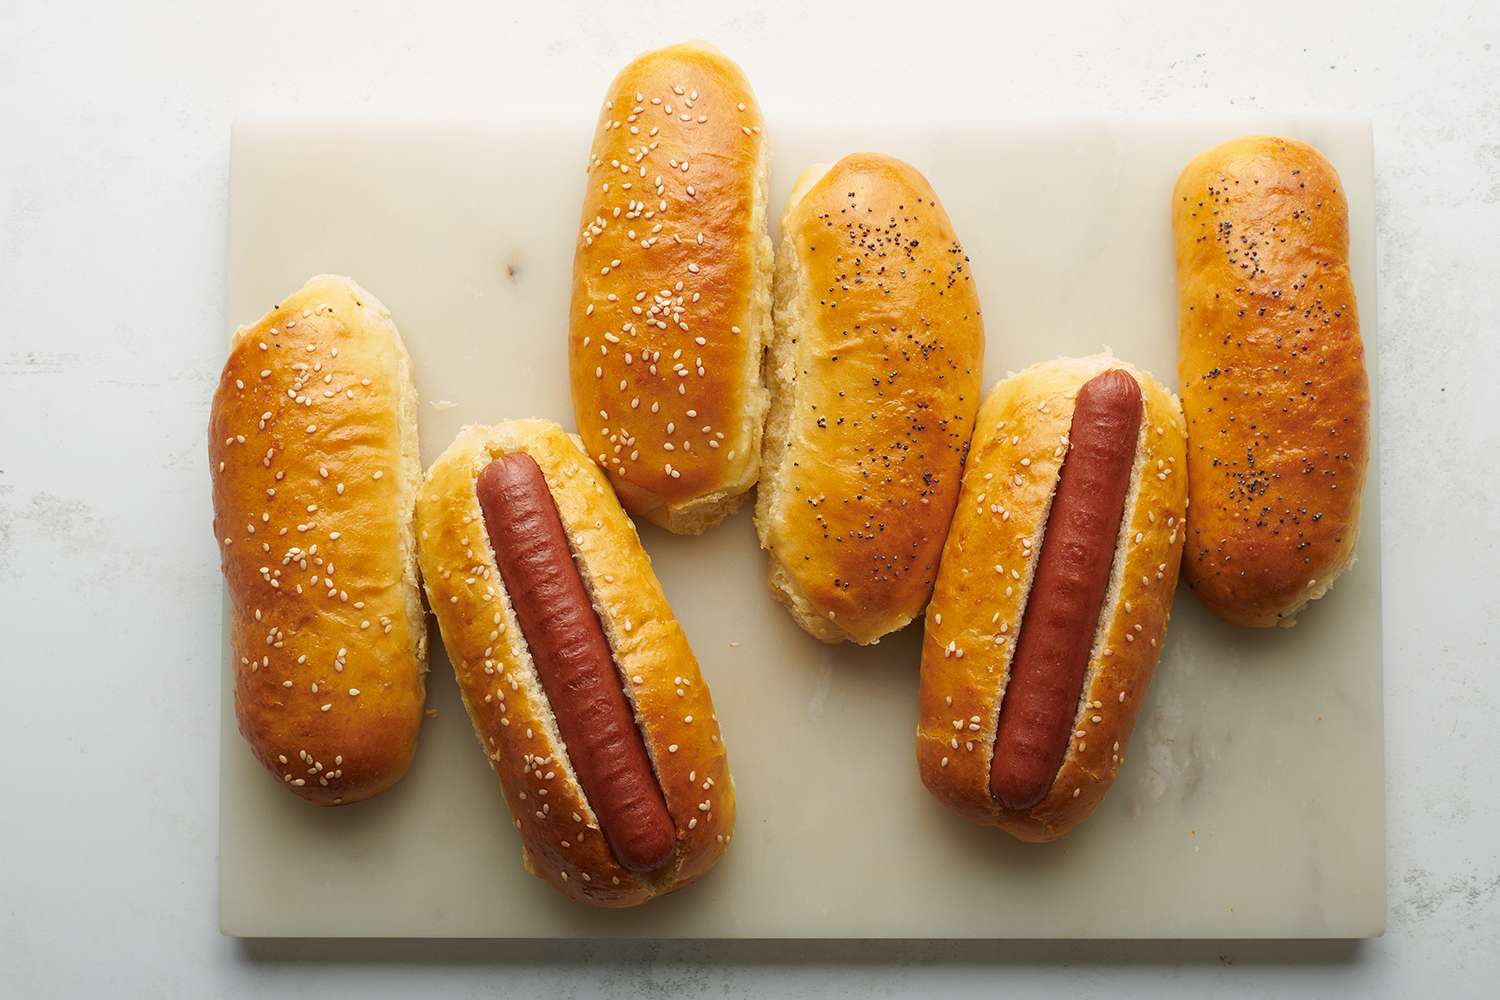 Hot dog buns and hot dogs 